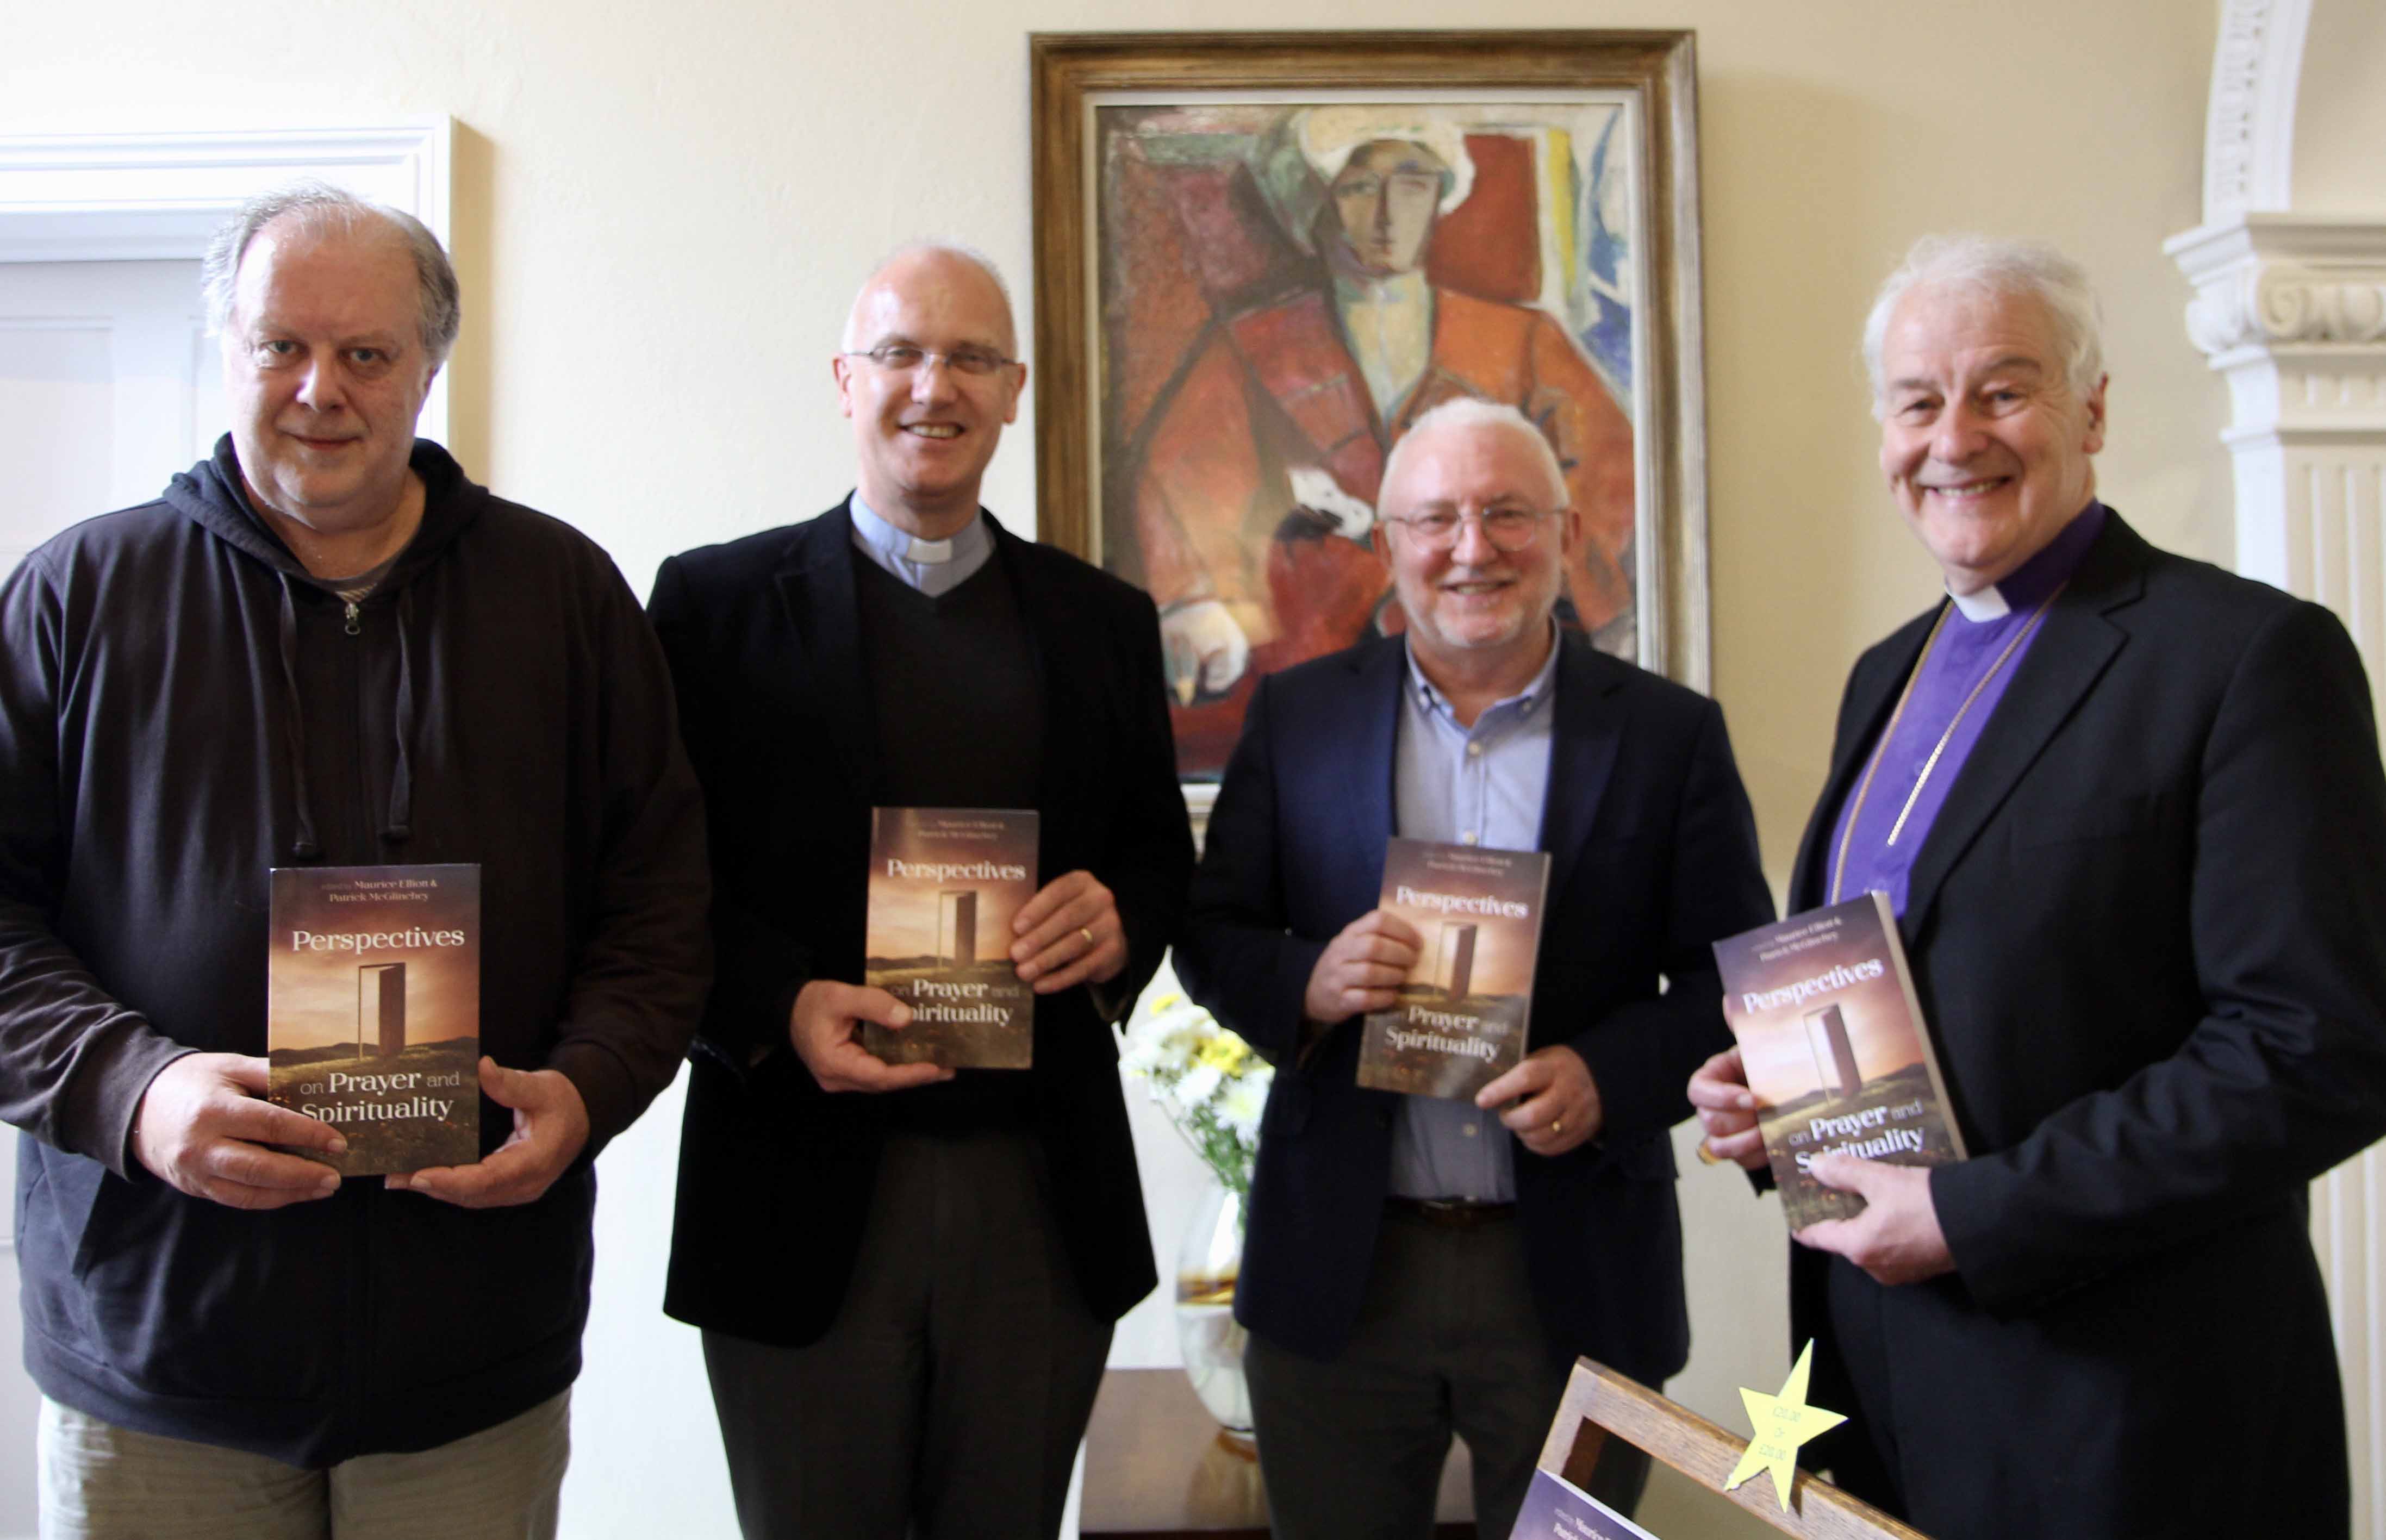 At the launch of Perspectives on Prayer and Spirituality were the Revd Dr Craig Bartholomew, Canon Dr Maurice Elliott and the Revd Dr Paddy McGlinchey (editors) and Archbishop Michael Jackson.